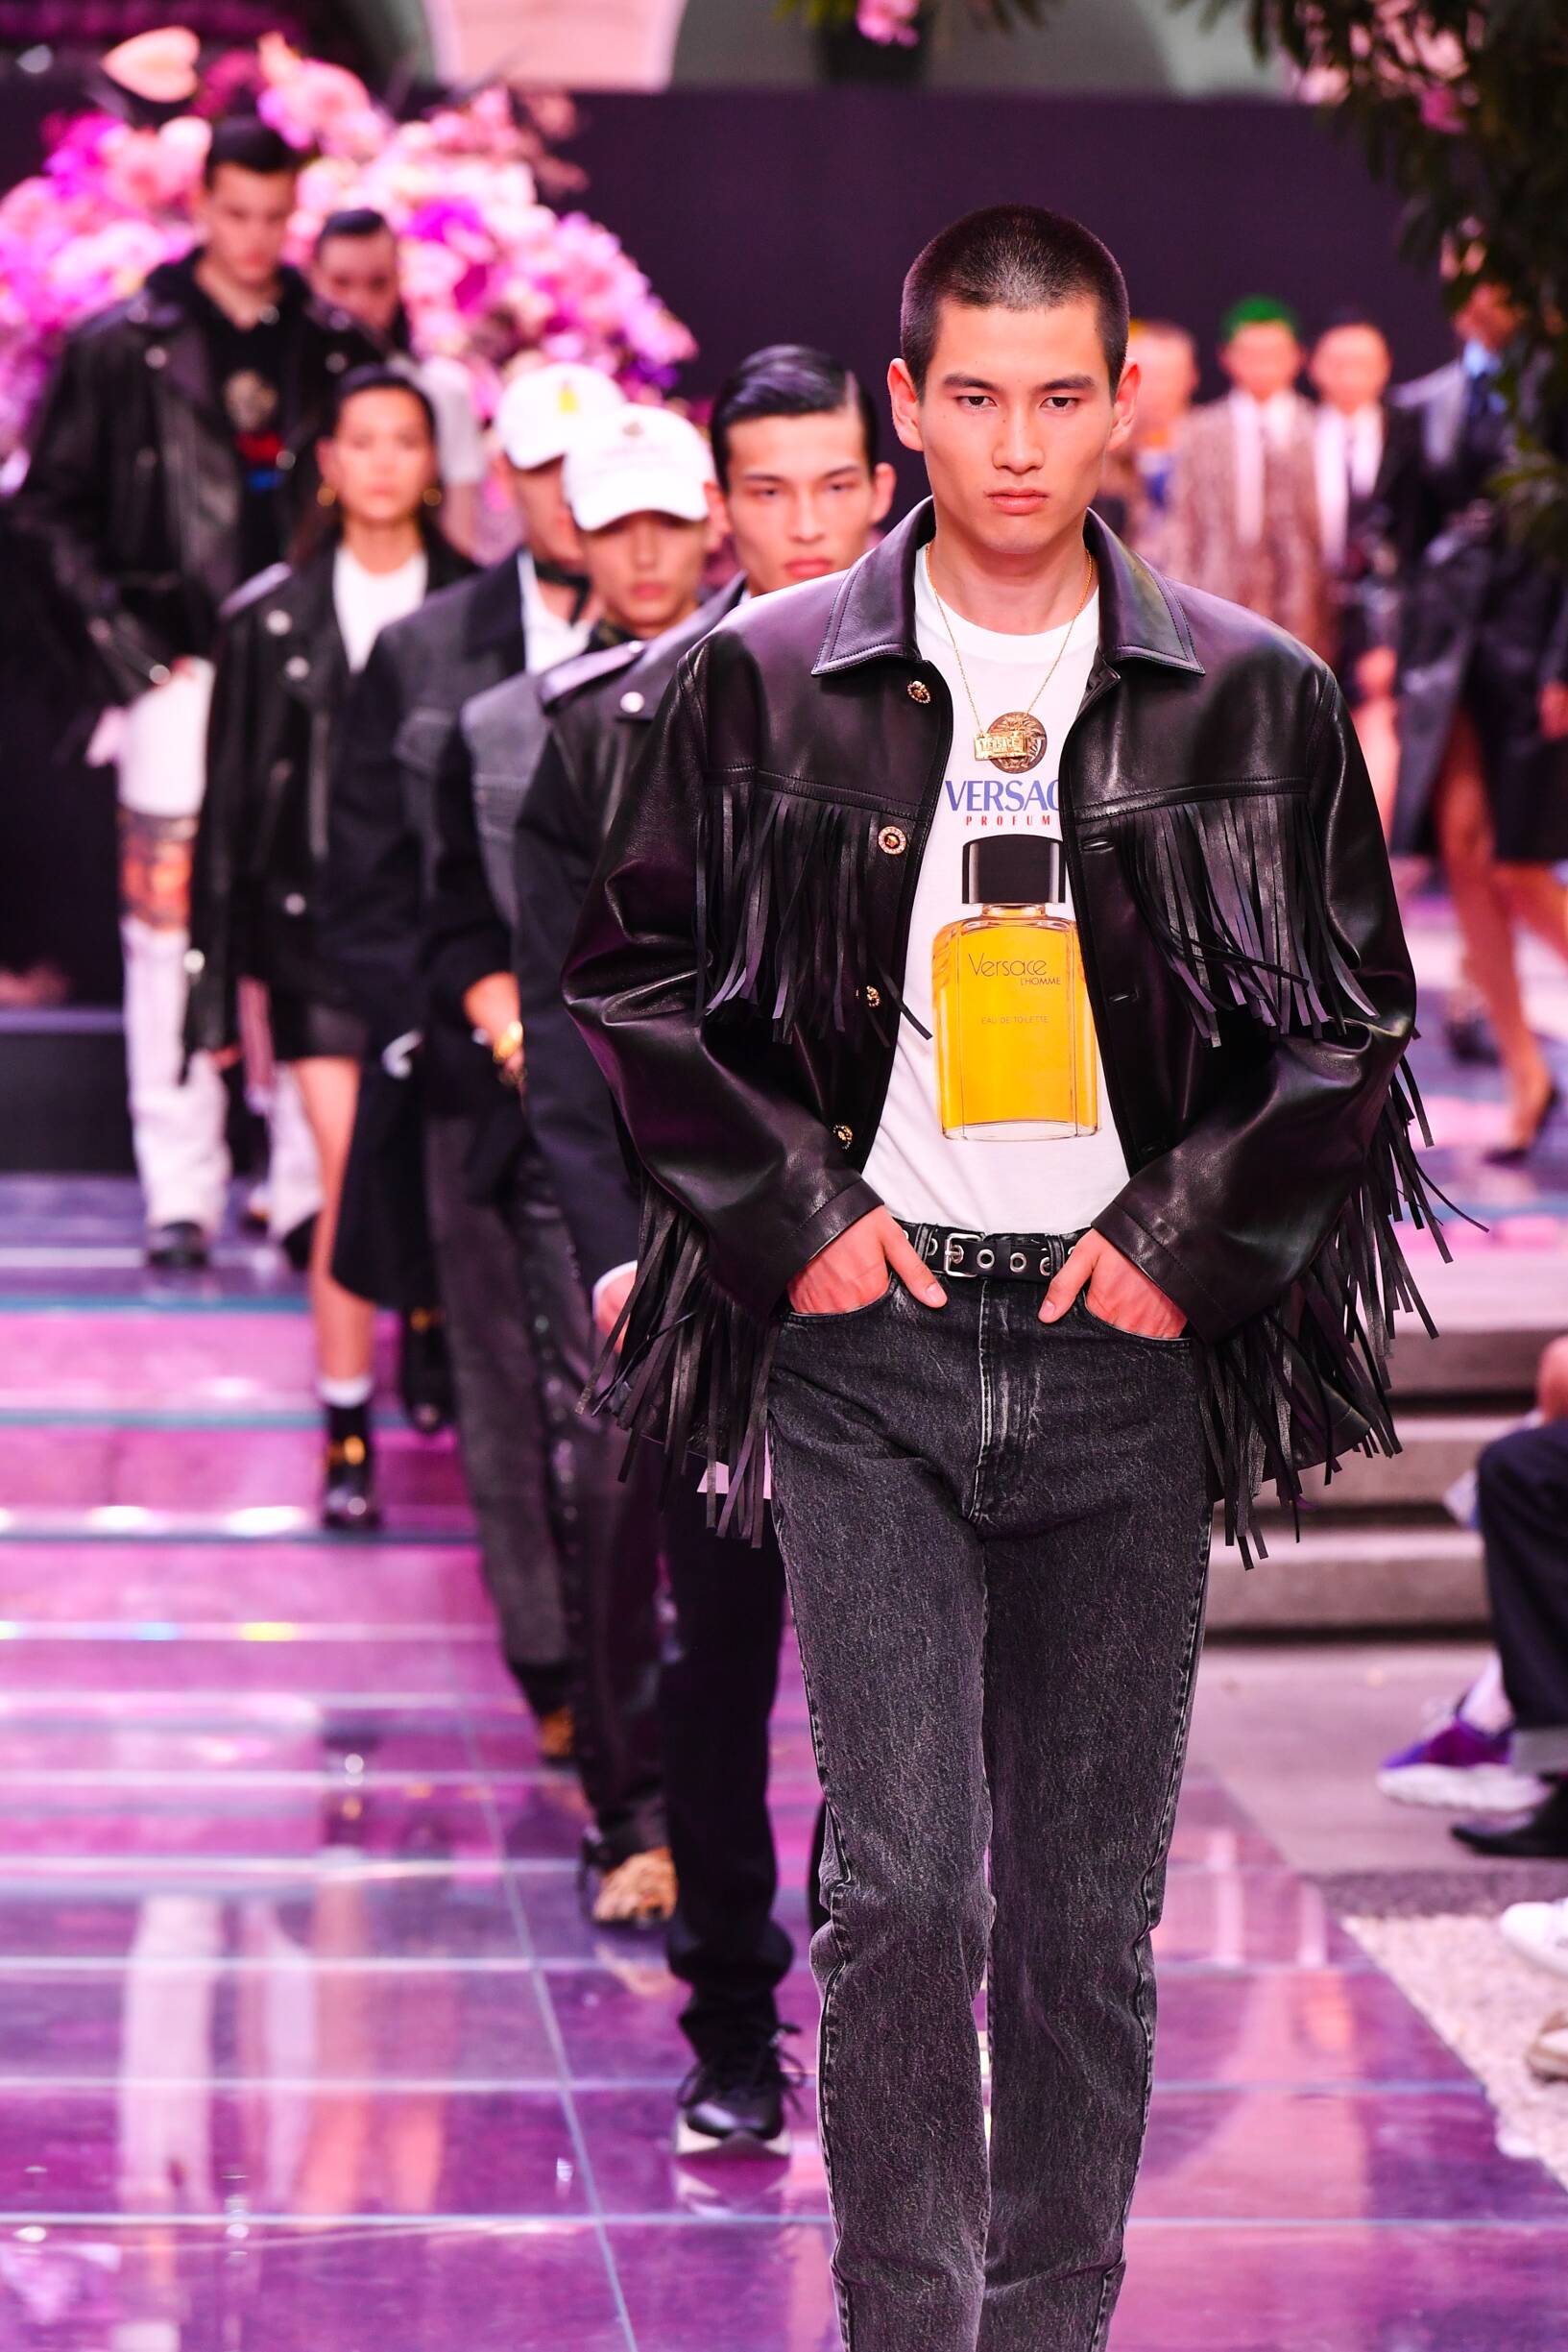 VERSACE SPRING SUMMER 2020 MEN’S COLLECTION | The Skinny Beep